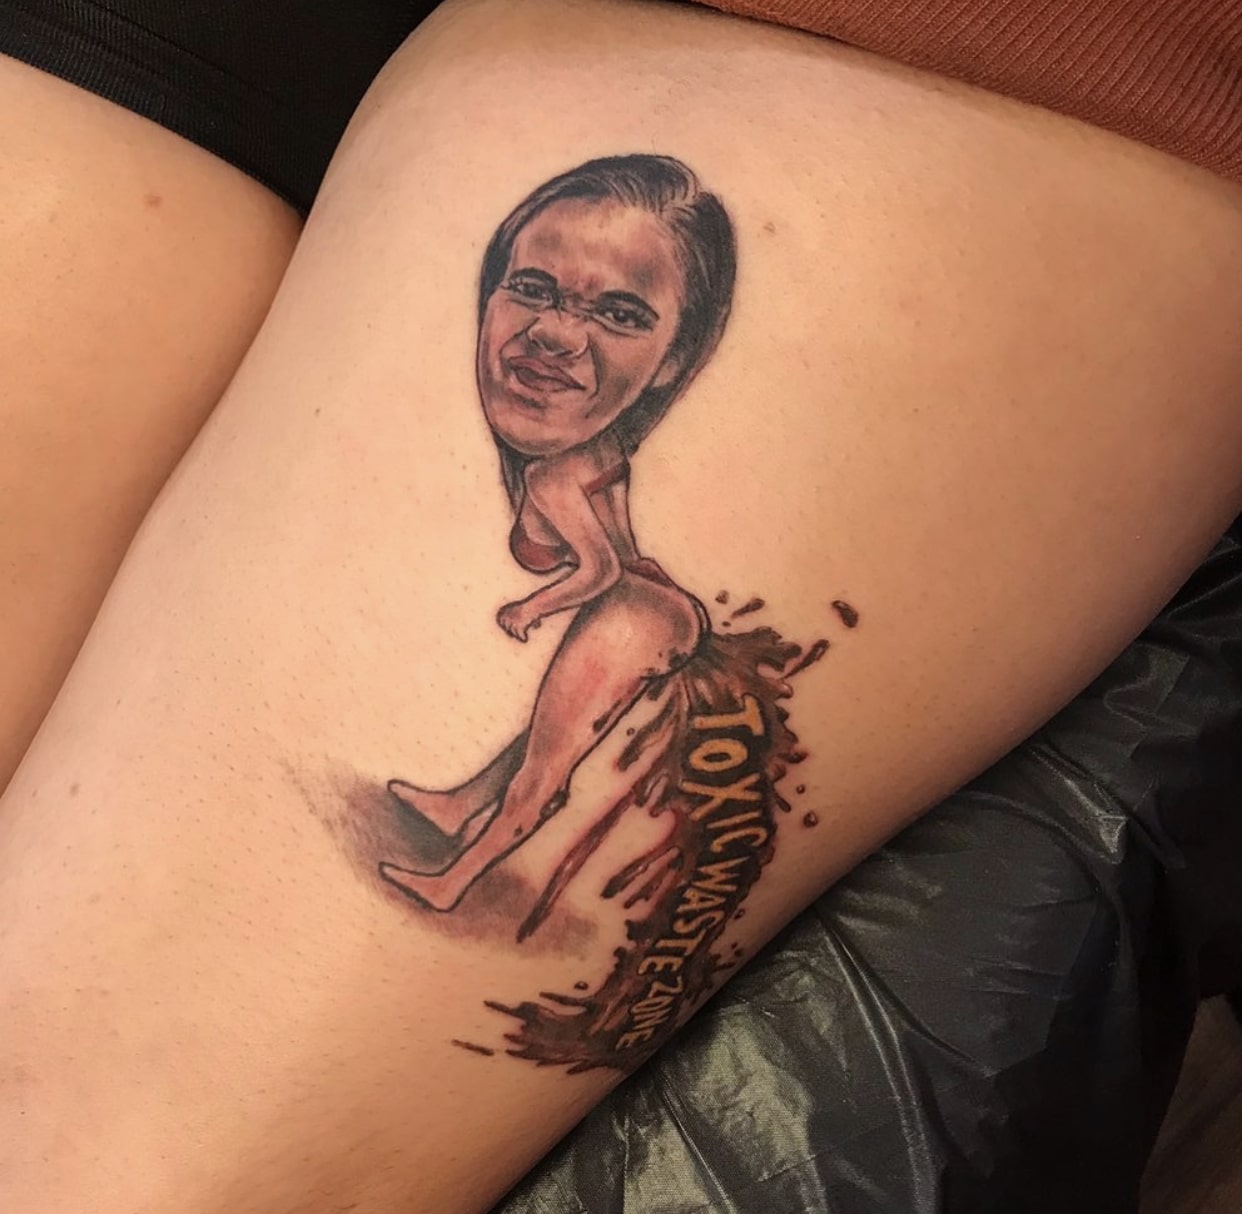 Really Bad Tattoos Saved By A Good Artist - Ftw Gallery